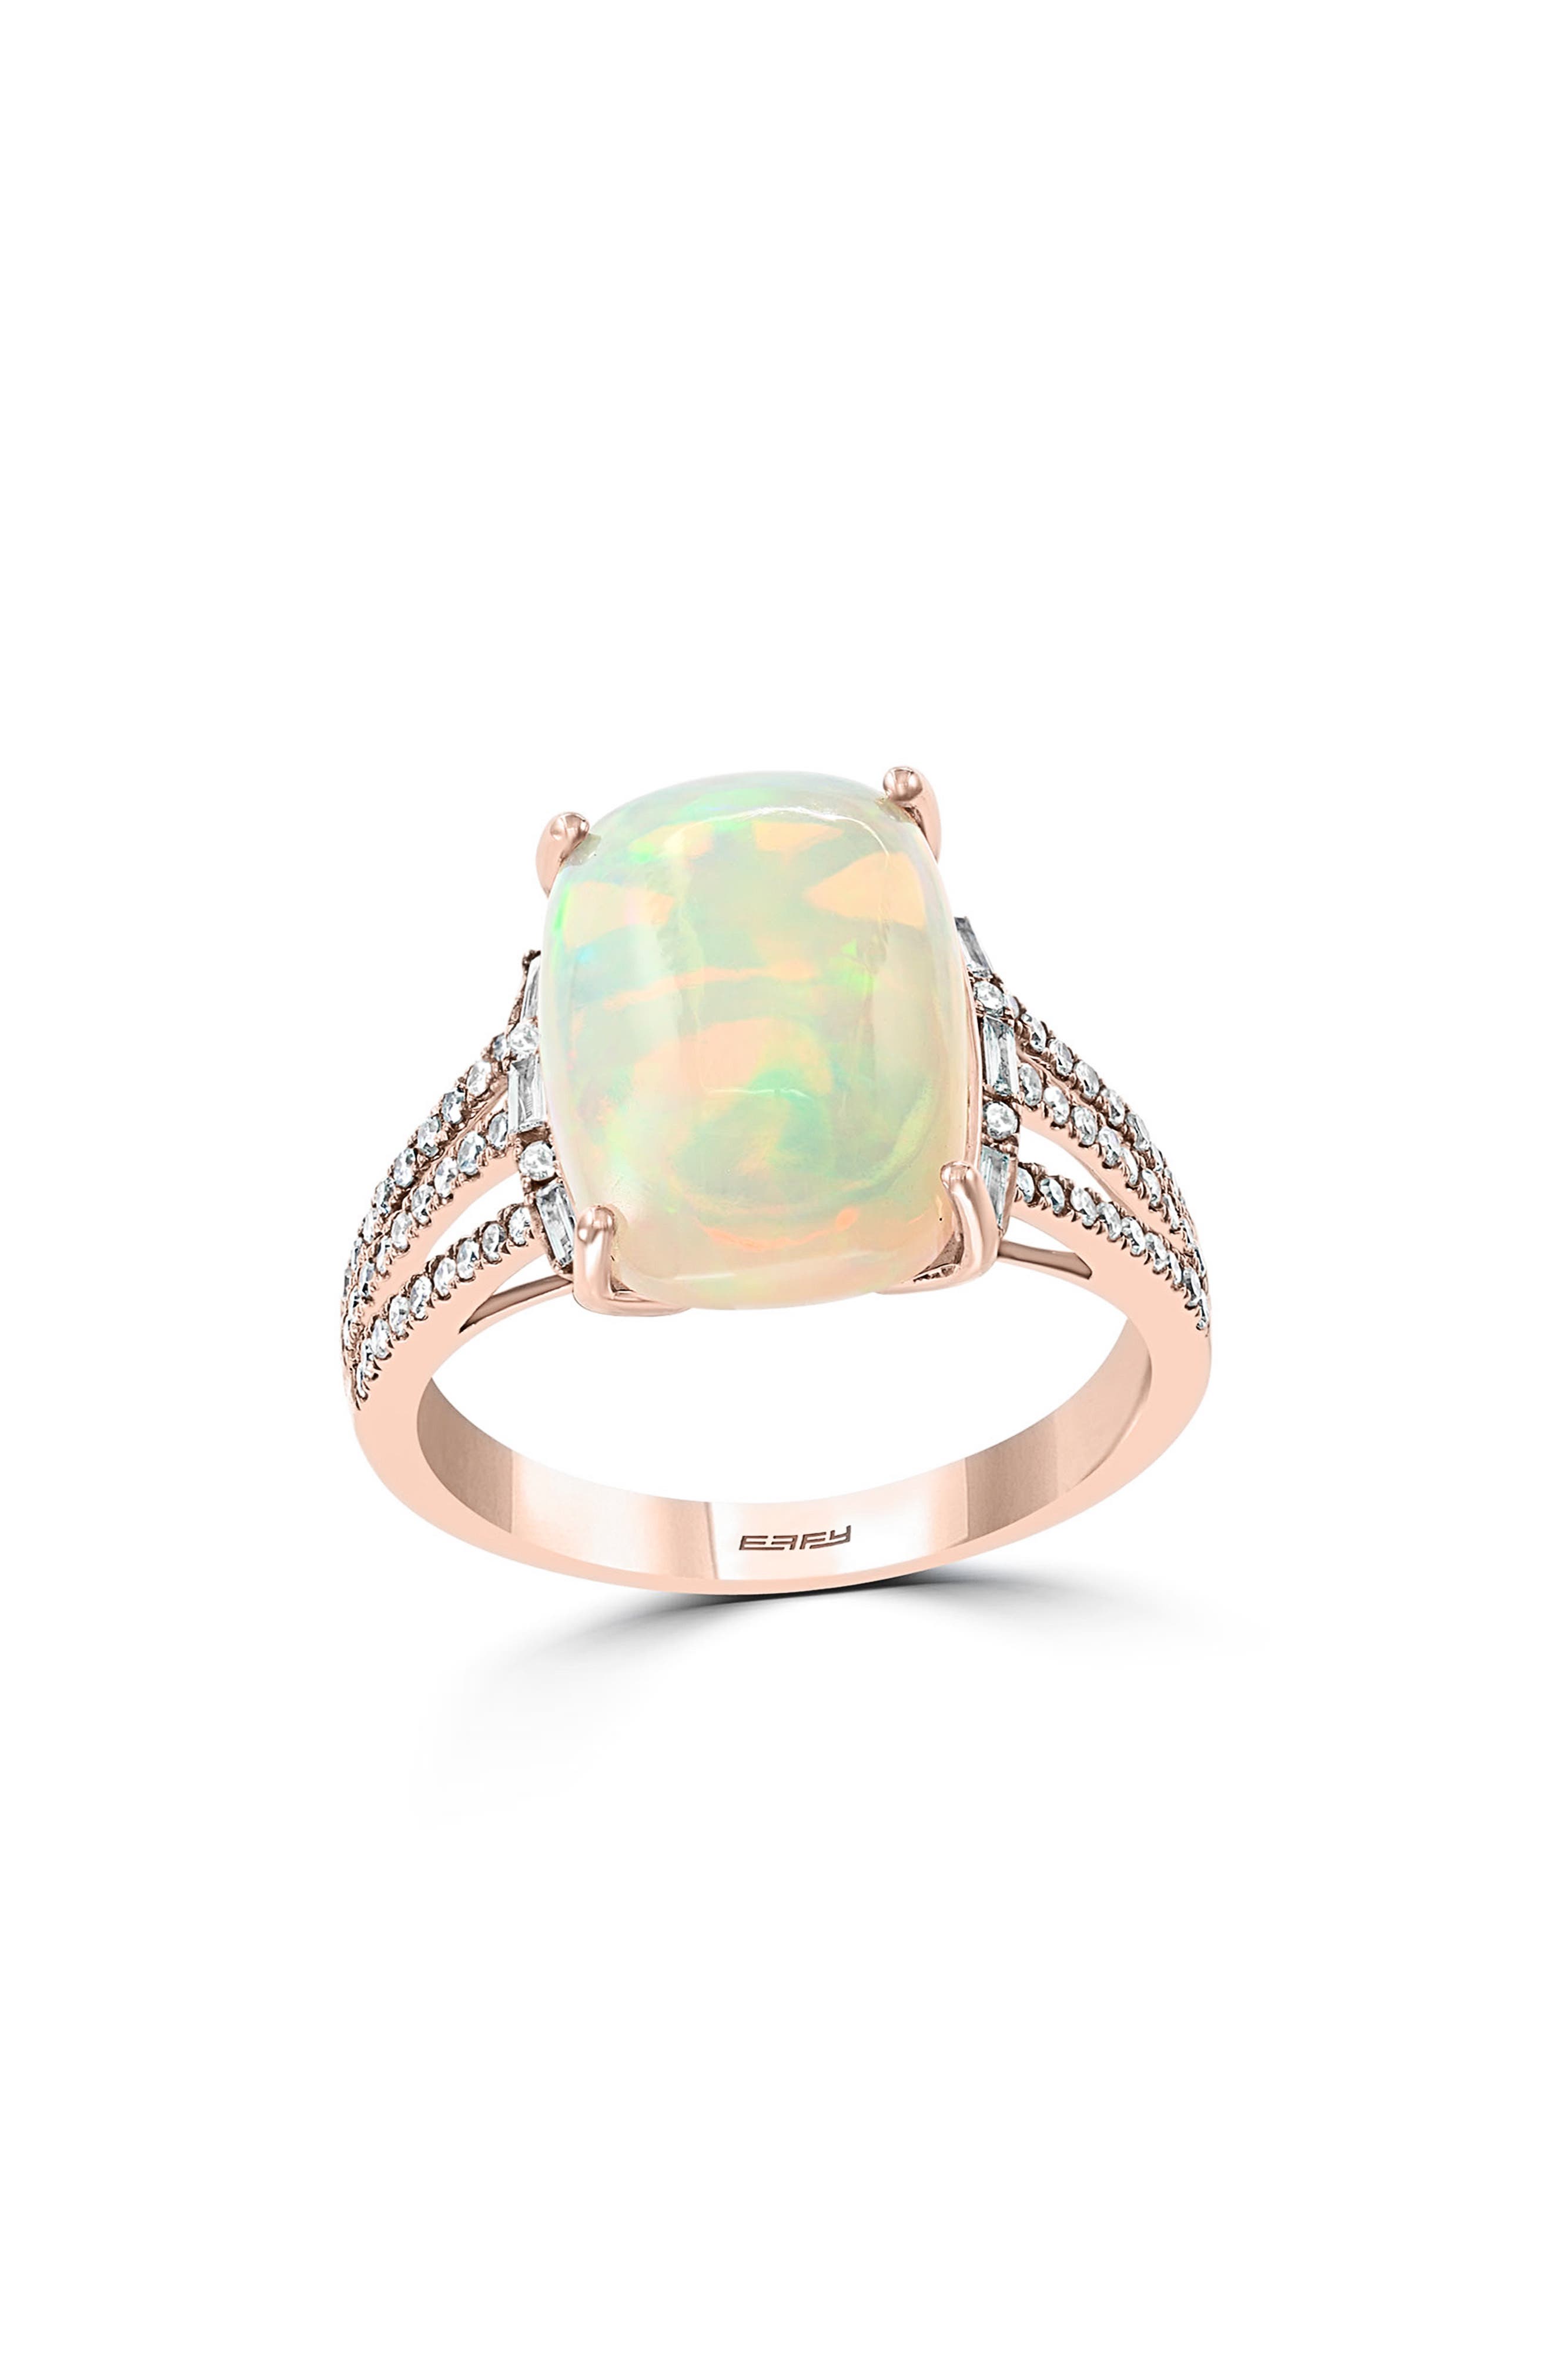 Gin and Grace 14K Rose Gold Oval-cut Ethiopian Opal and Diamond Accent Ring For Women Size 6, 7 and 8